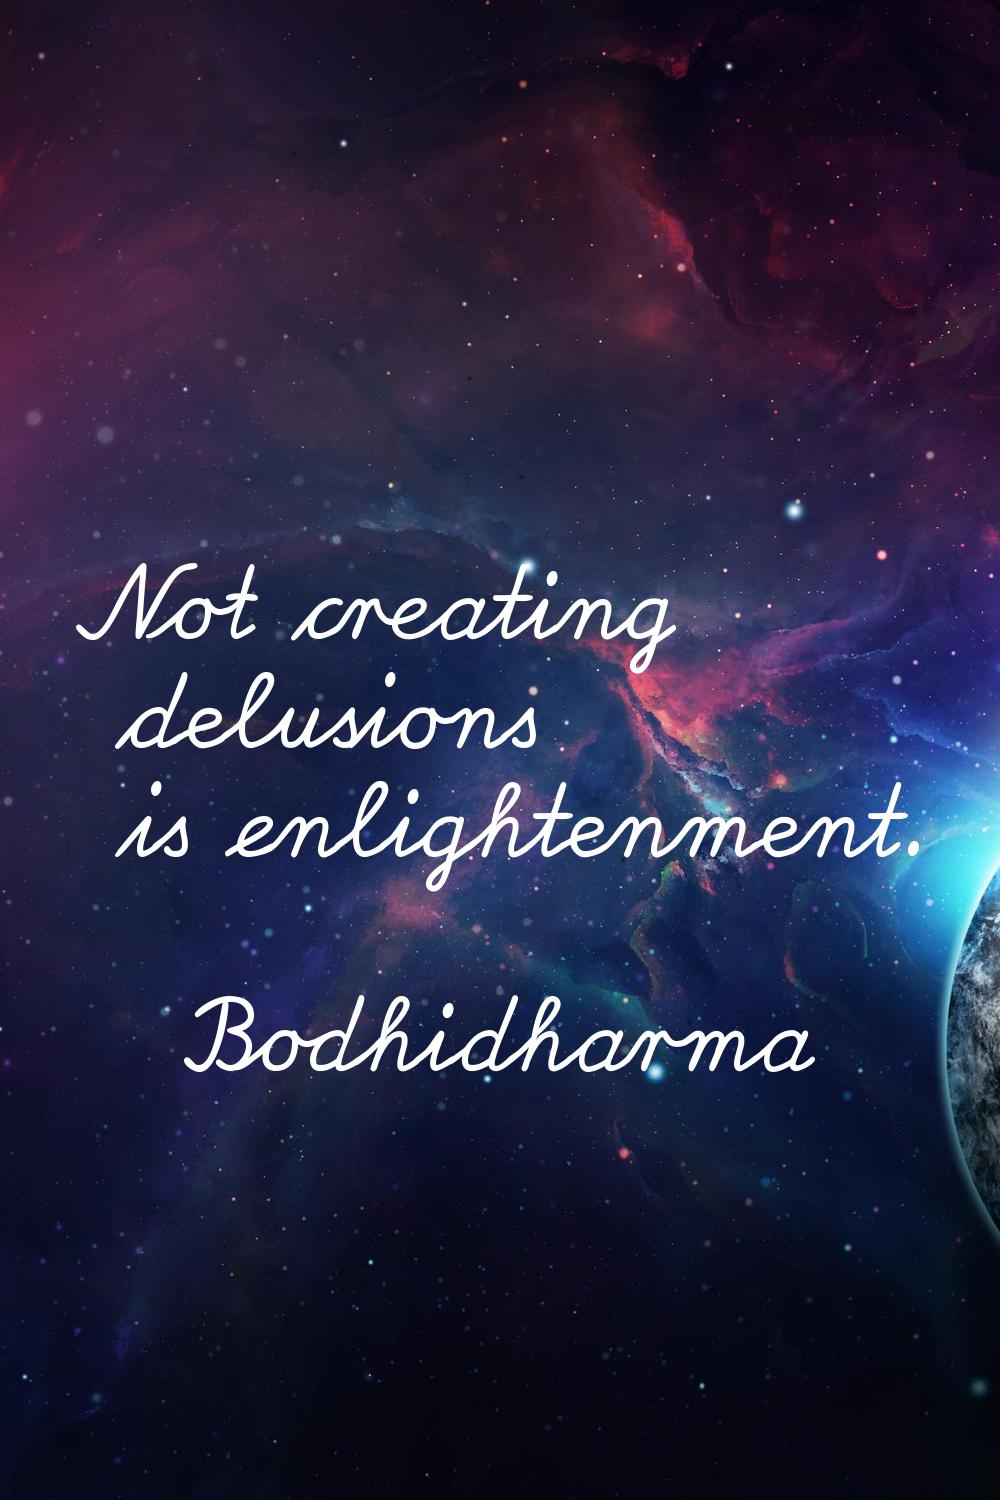 Not creating delusions is enlightenment.